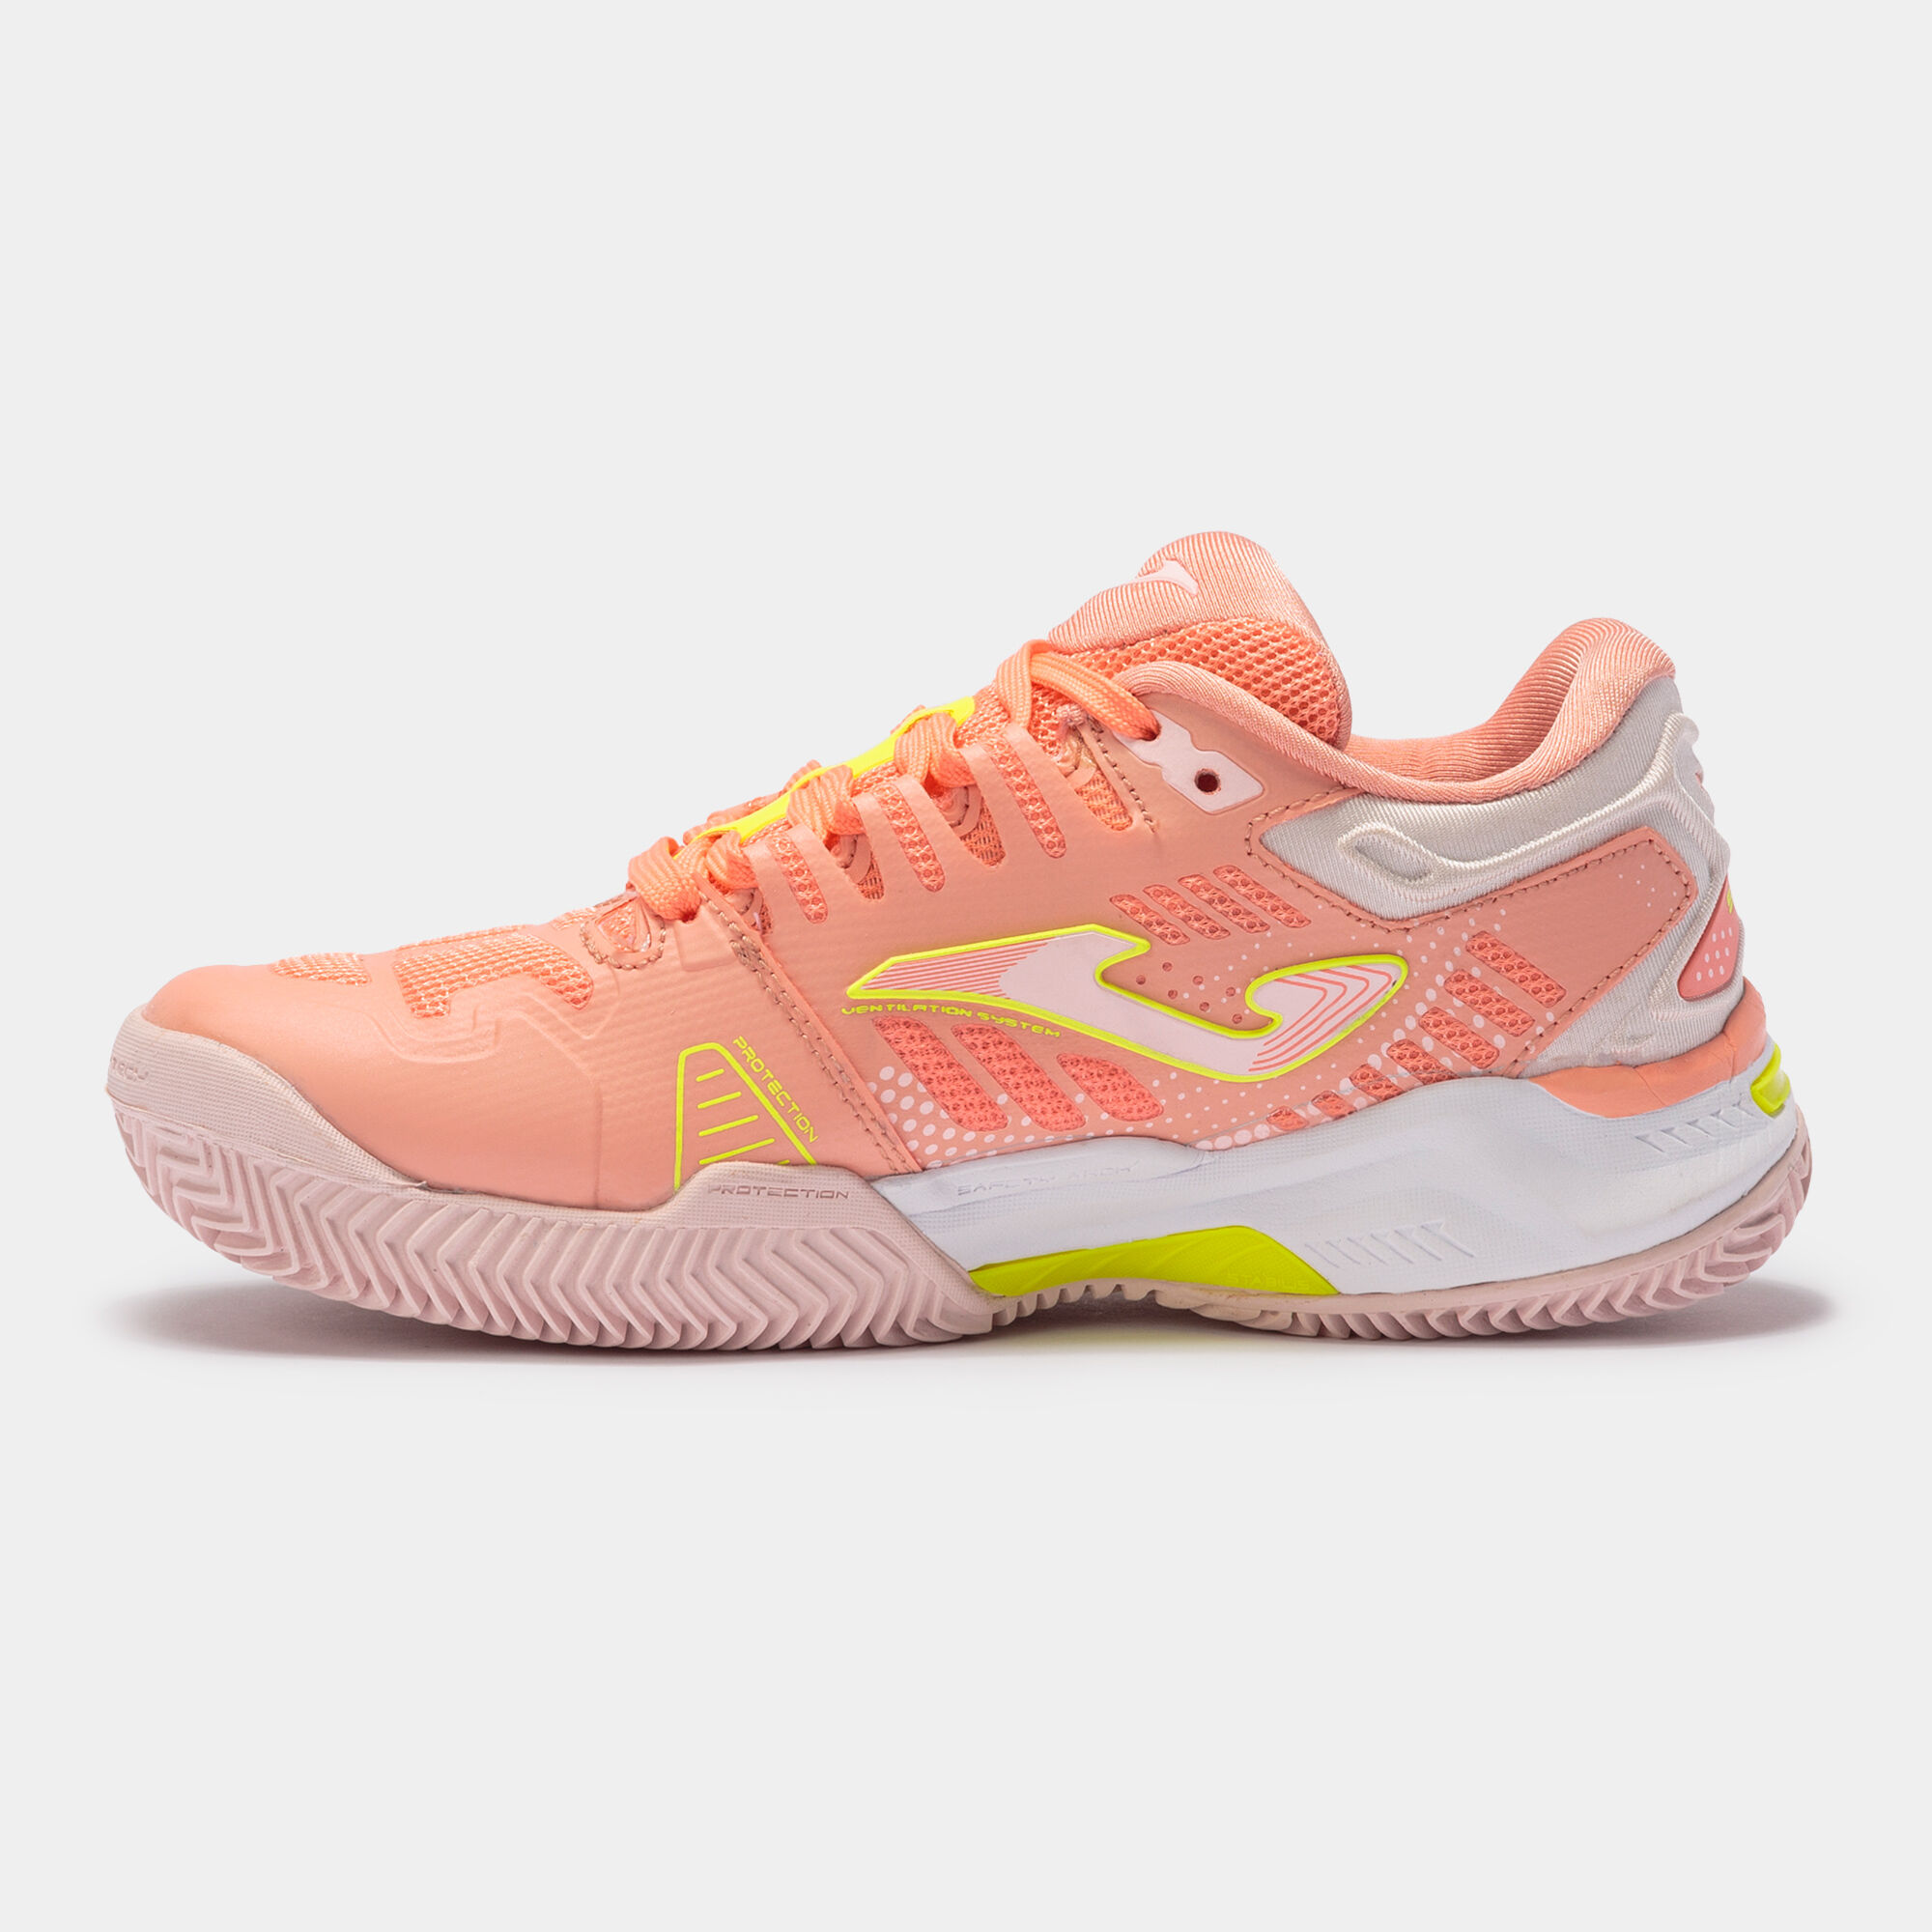 SHOES SLAM 22 CLAY JUNIOR PINK